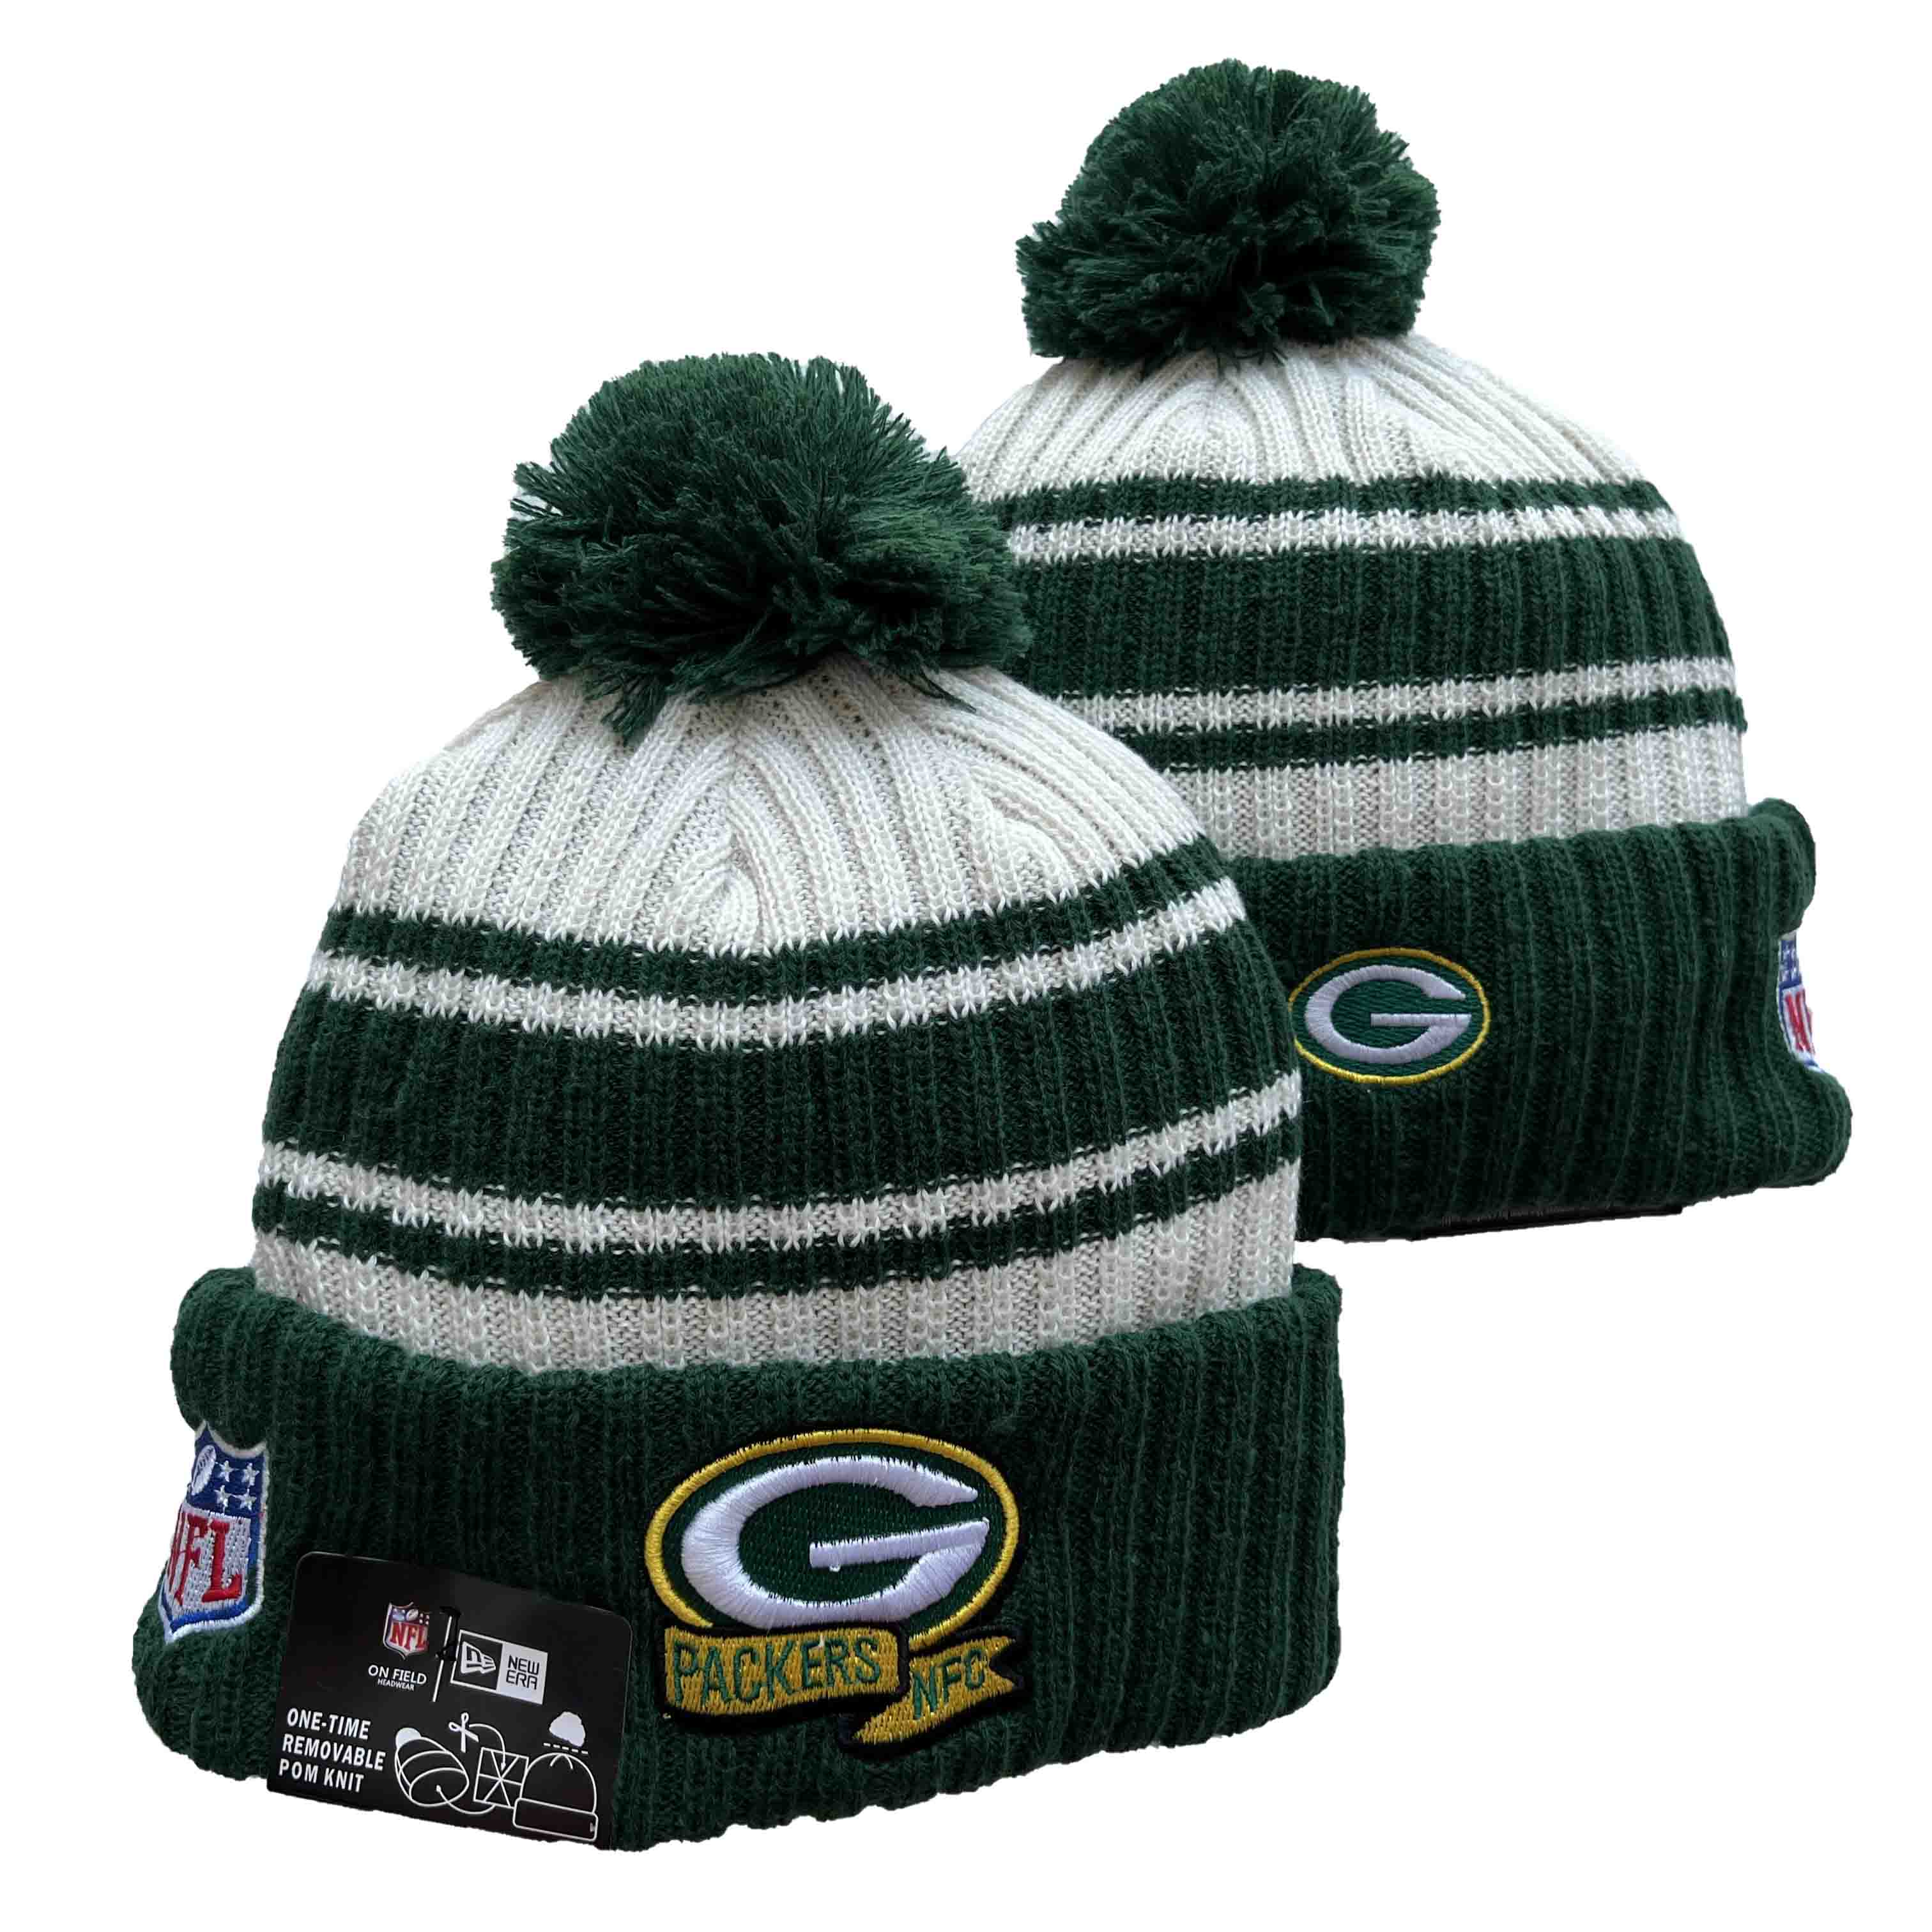 NFL Green Bay Packers Beanies Knit Hats-YD1181